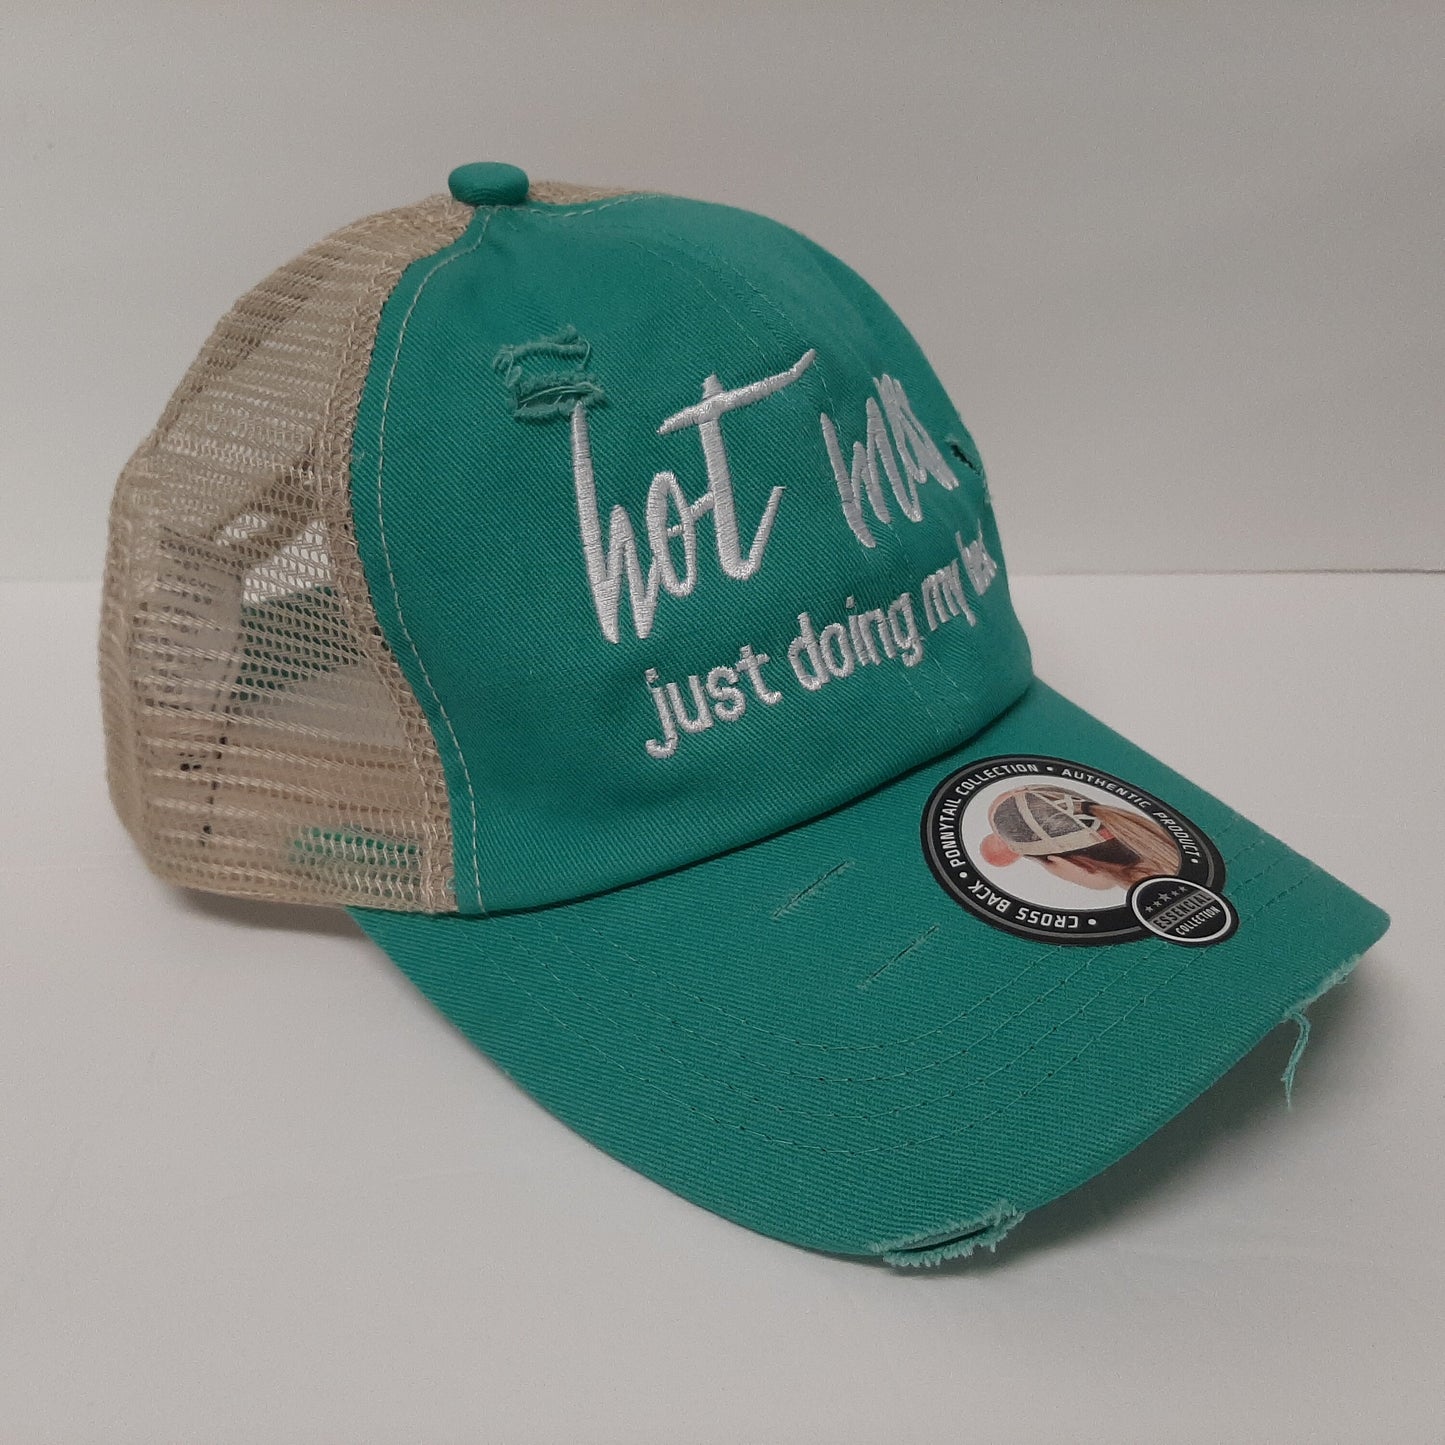 Hot Mess Women's Embroidered Pony Tail Criss Cross Hat Cap Teal Cotton